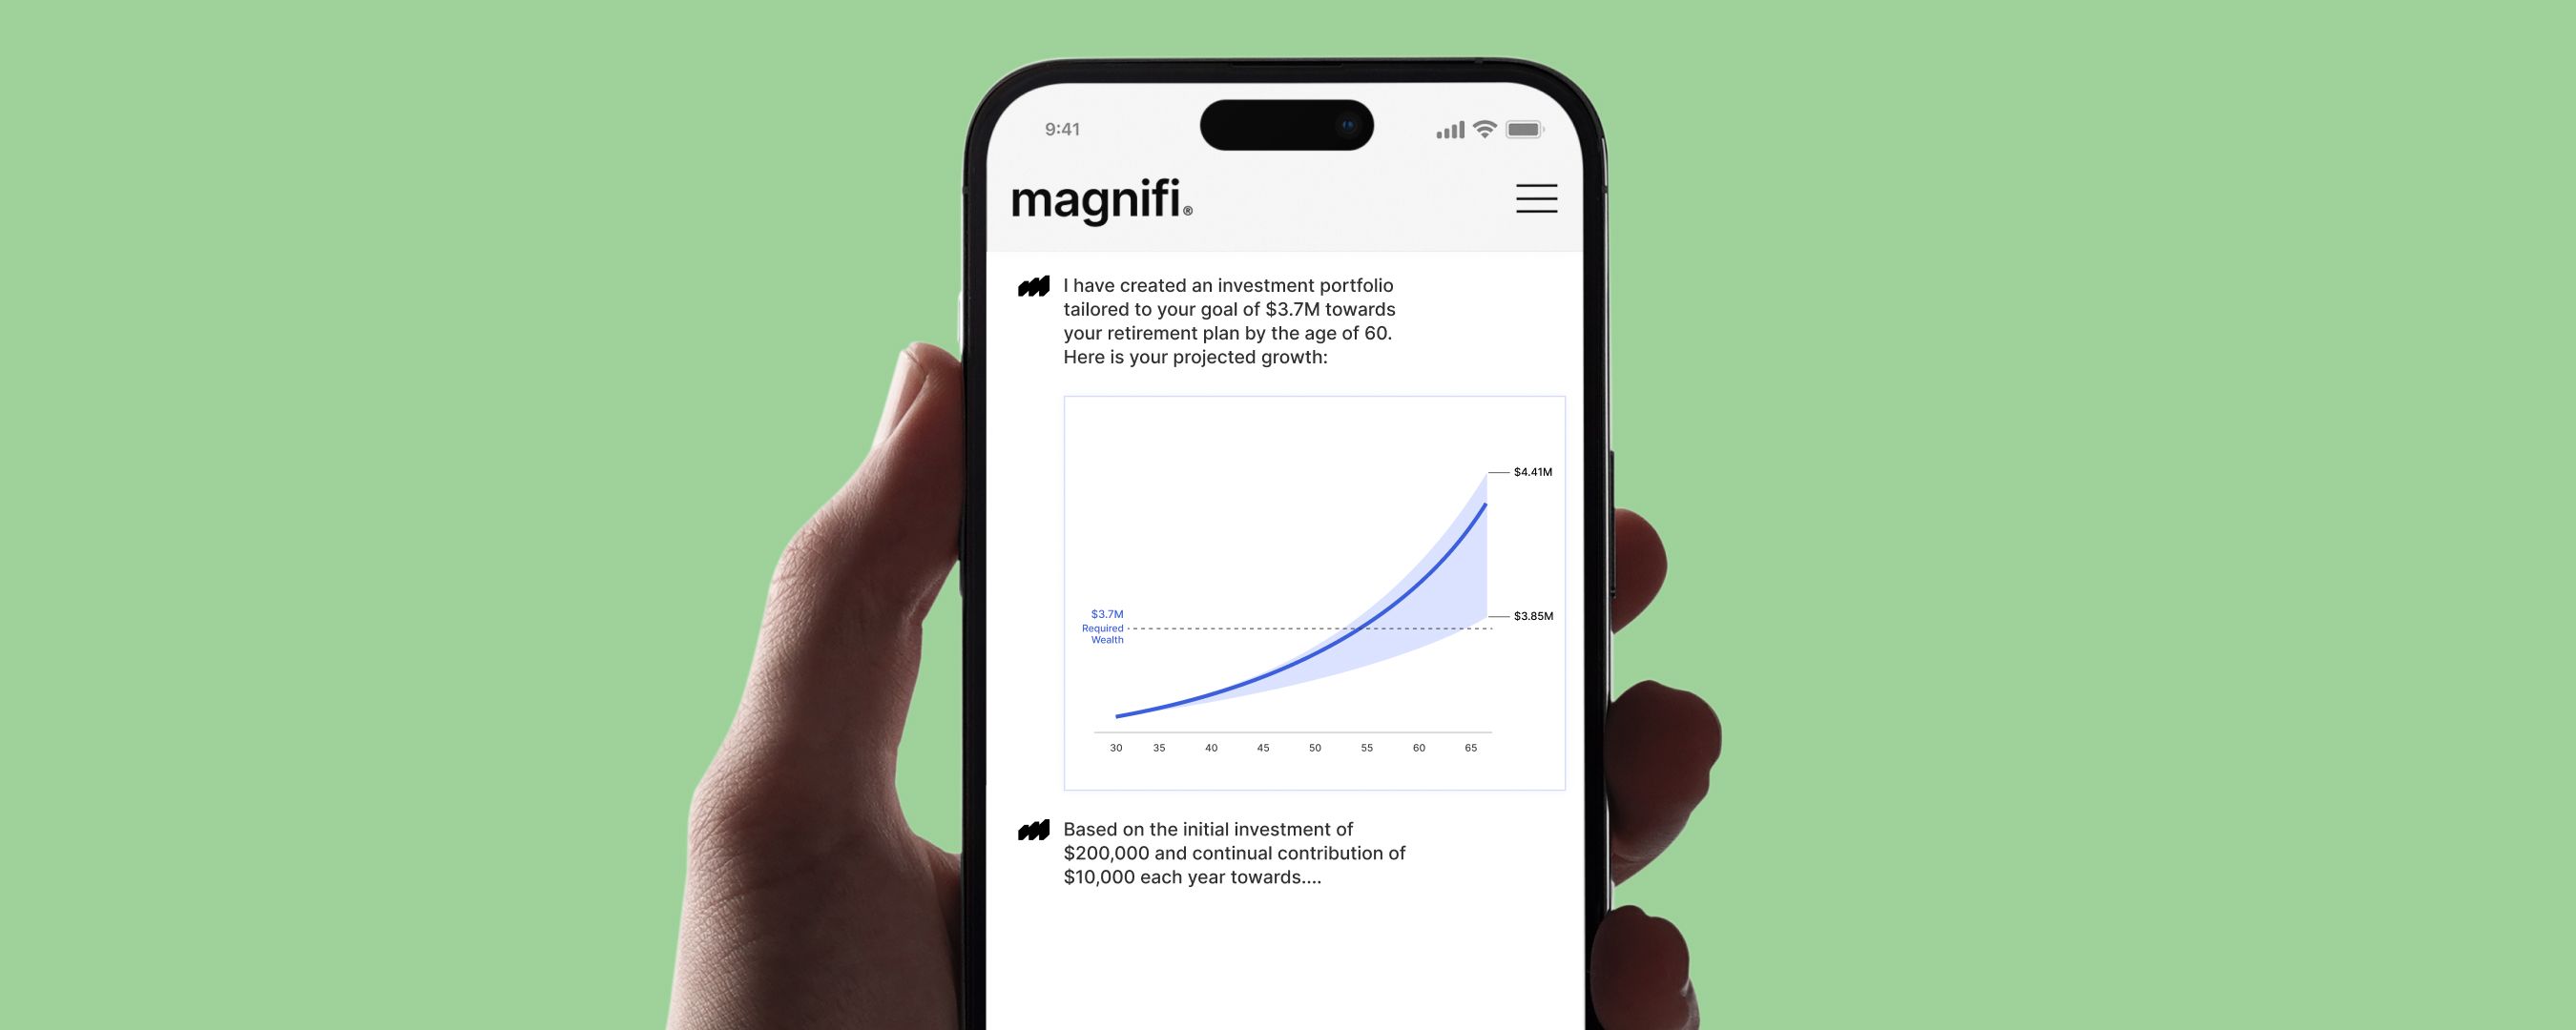 Magnifi app featuring growth of investment account over time